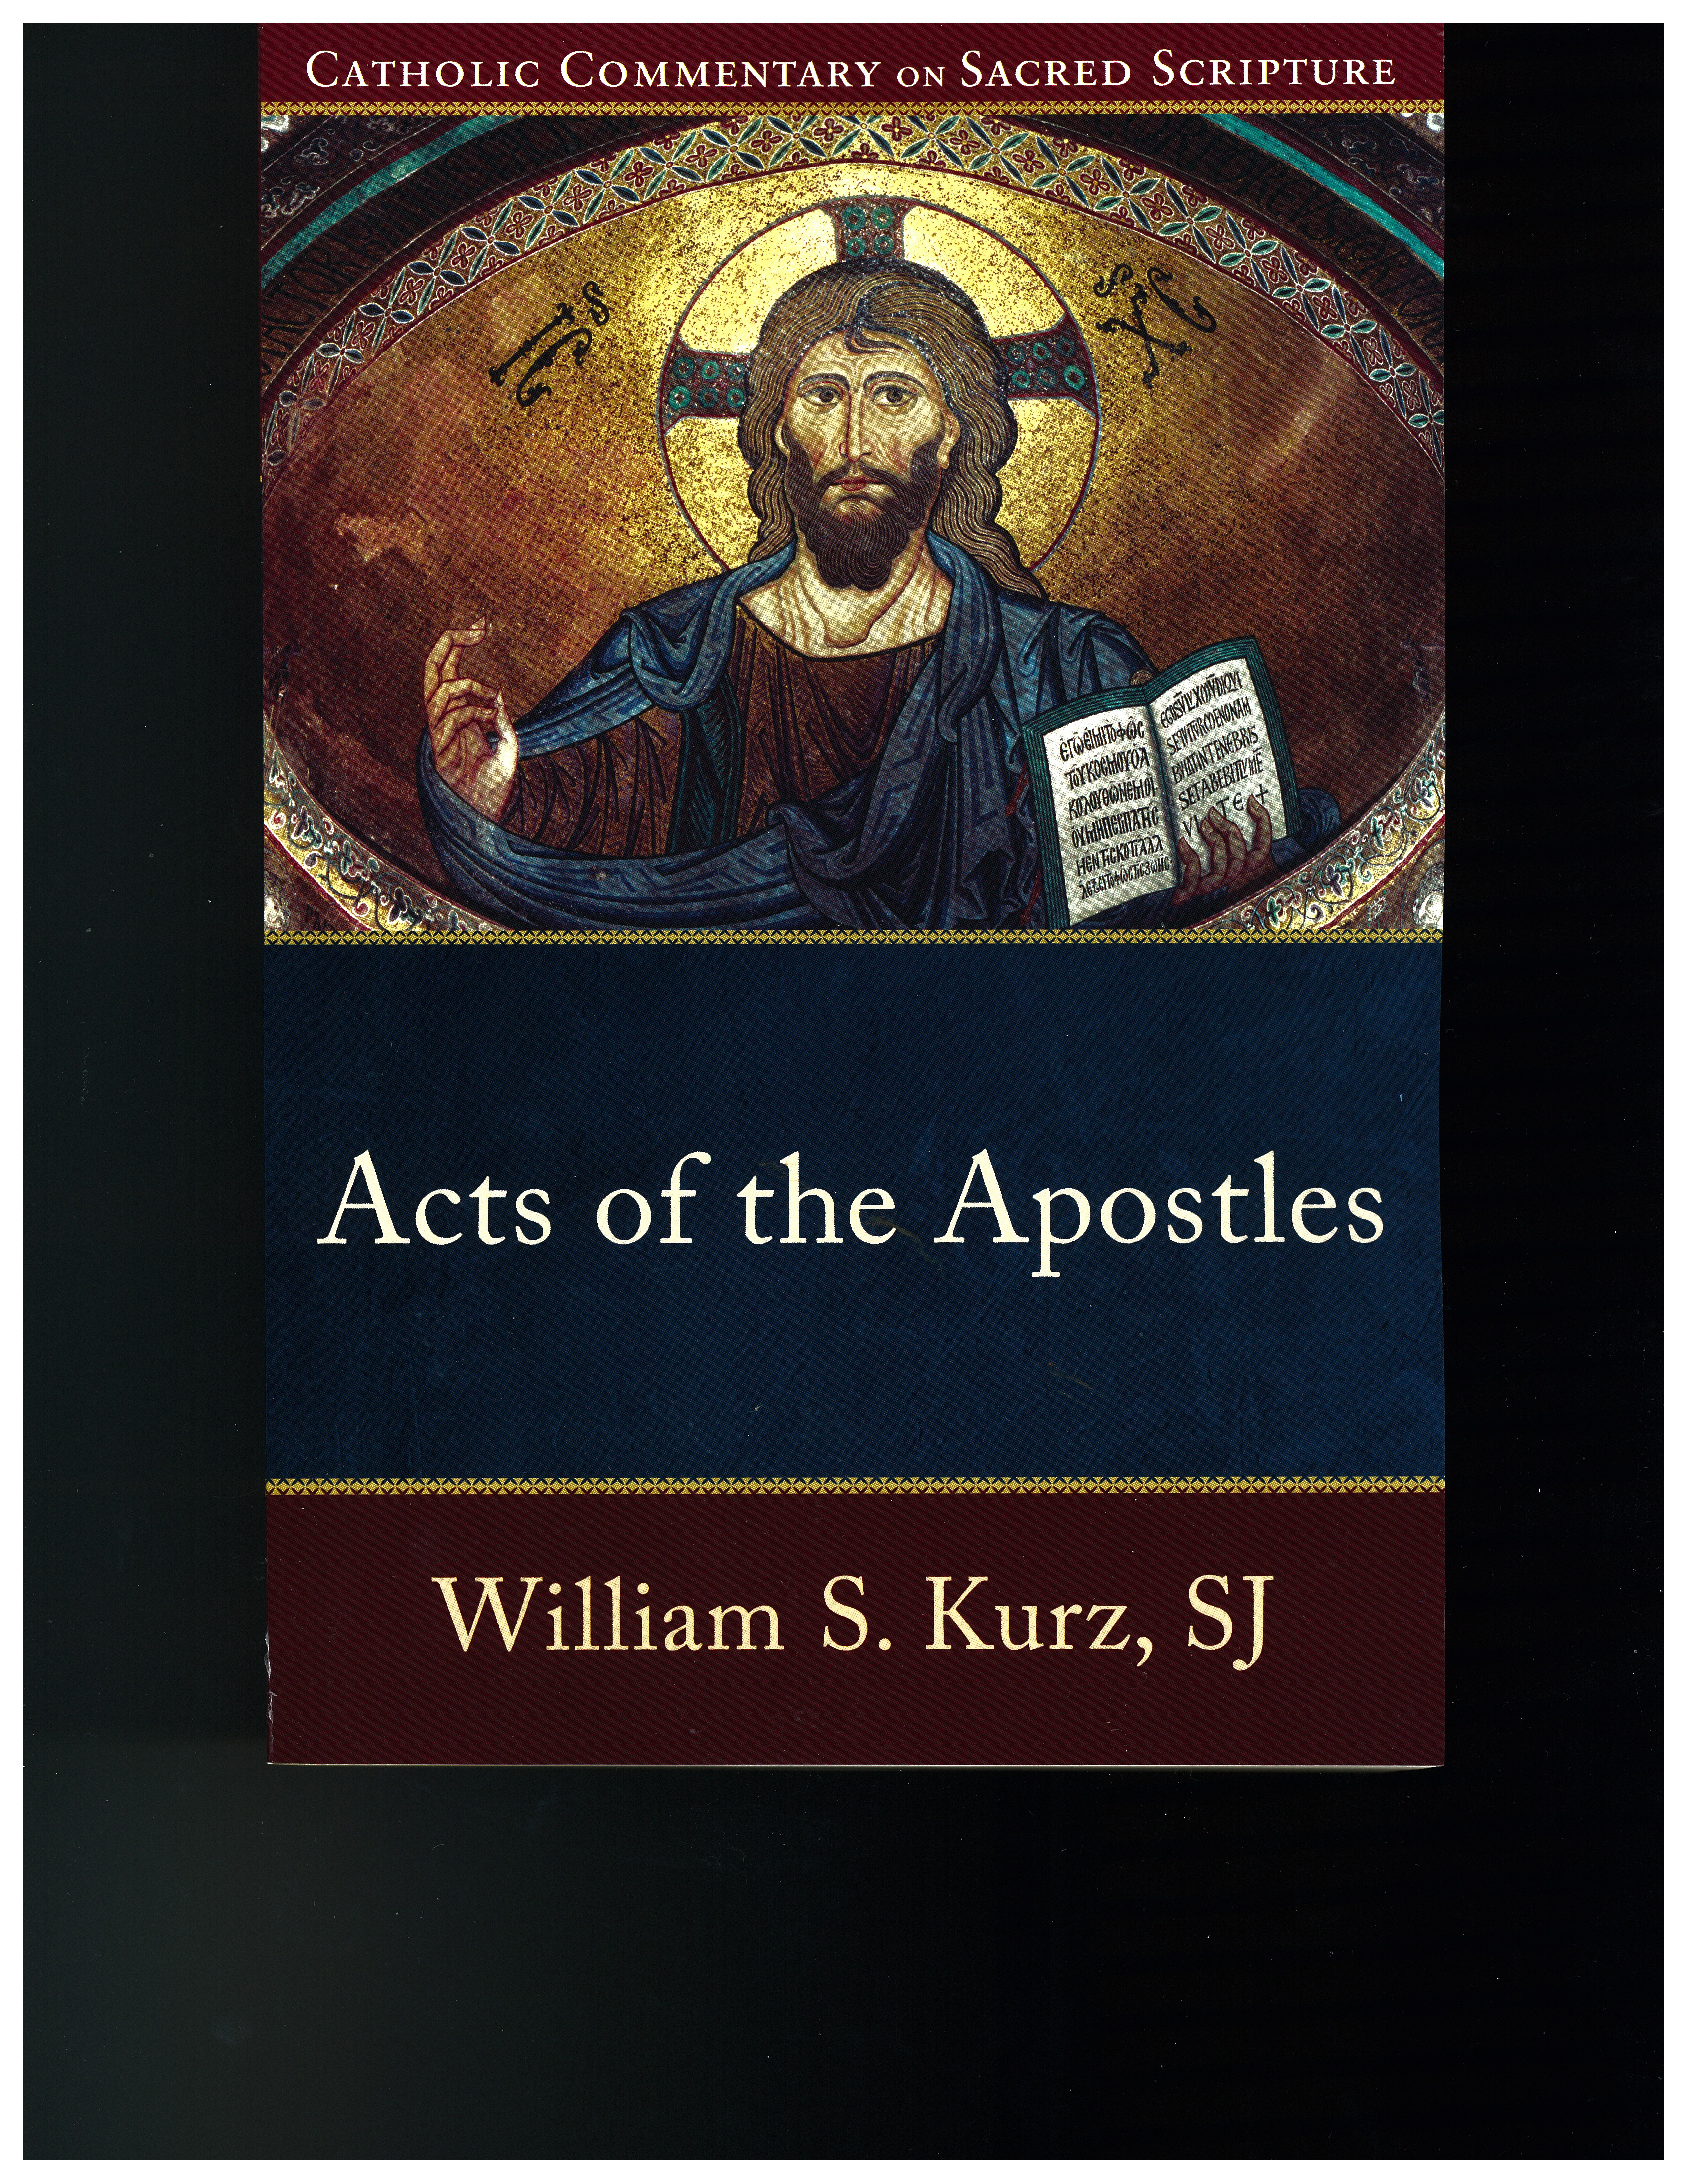 Acts of the Apostles (Catholic Commentary on Sacred Scripture) by Willam Kurz 108-9780801036330